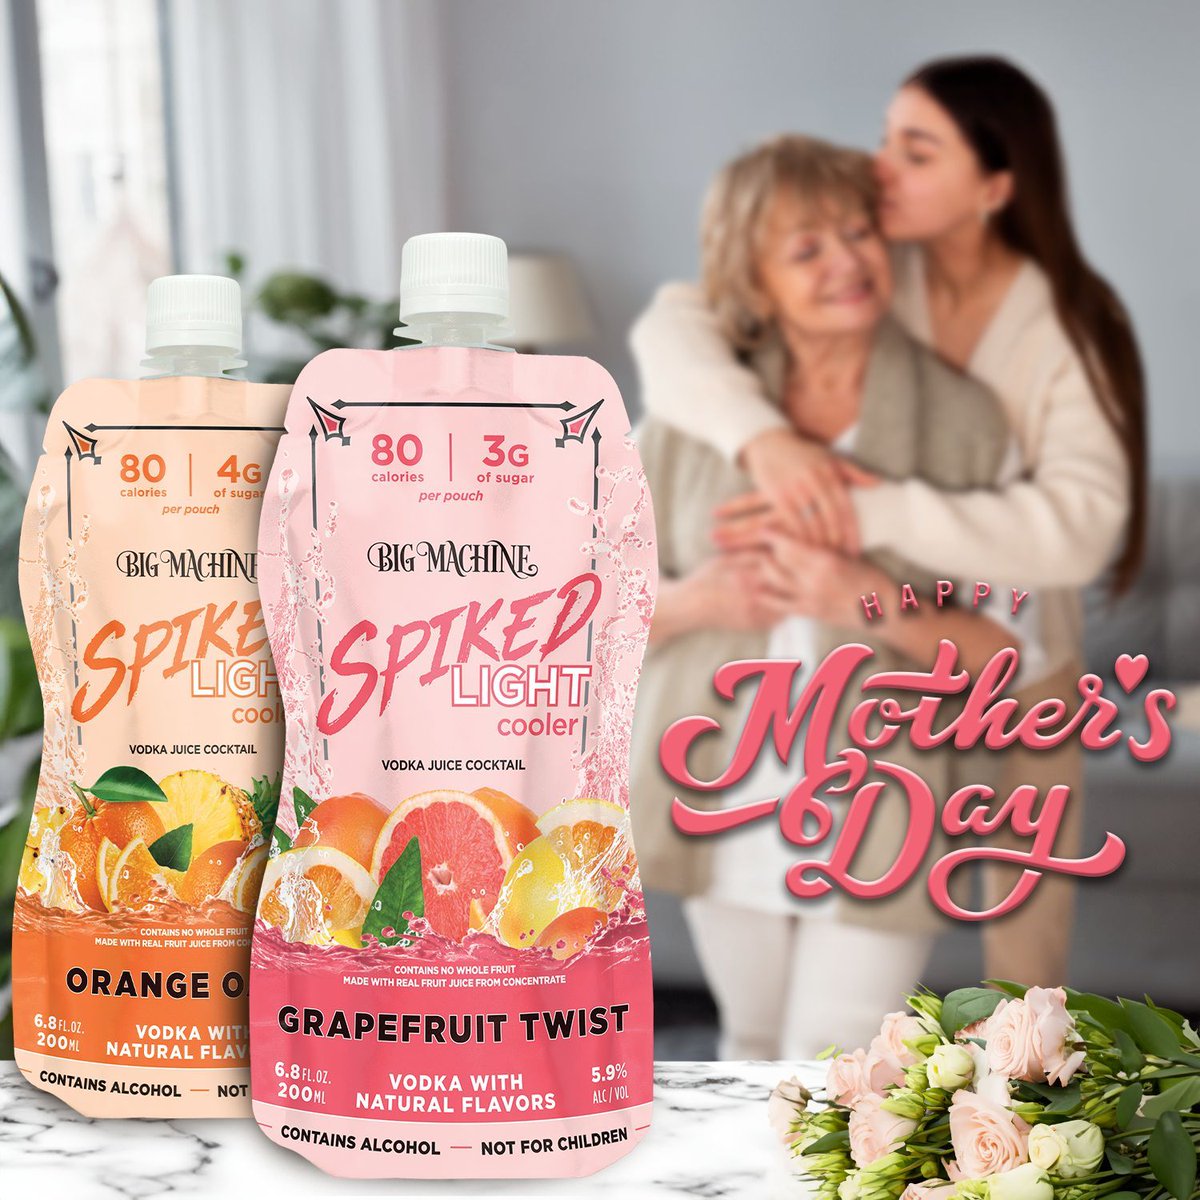 💕Wishing all the Moms out there an extremely Happy Mother's Day! 💖Feel free to kick back, relax, and Enjoy an Ice Cold Spiked Cooler! You deserve it! 🏷️ #mothersday #mothersday2024 #holiday #moms #mom